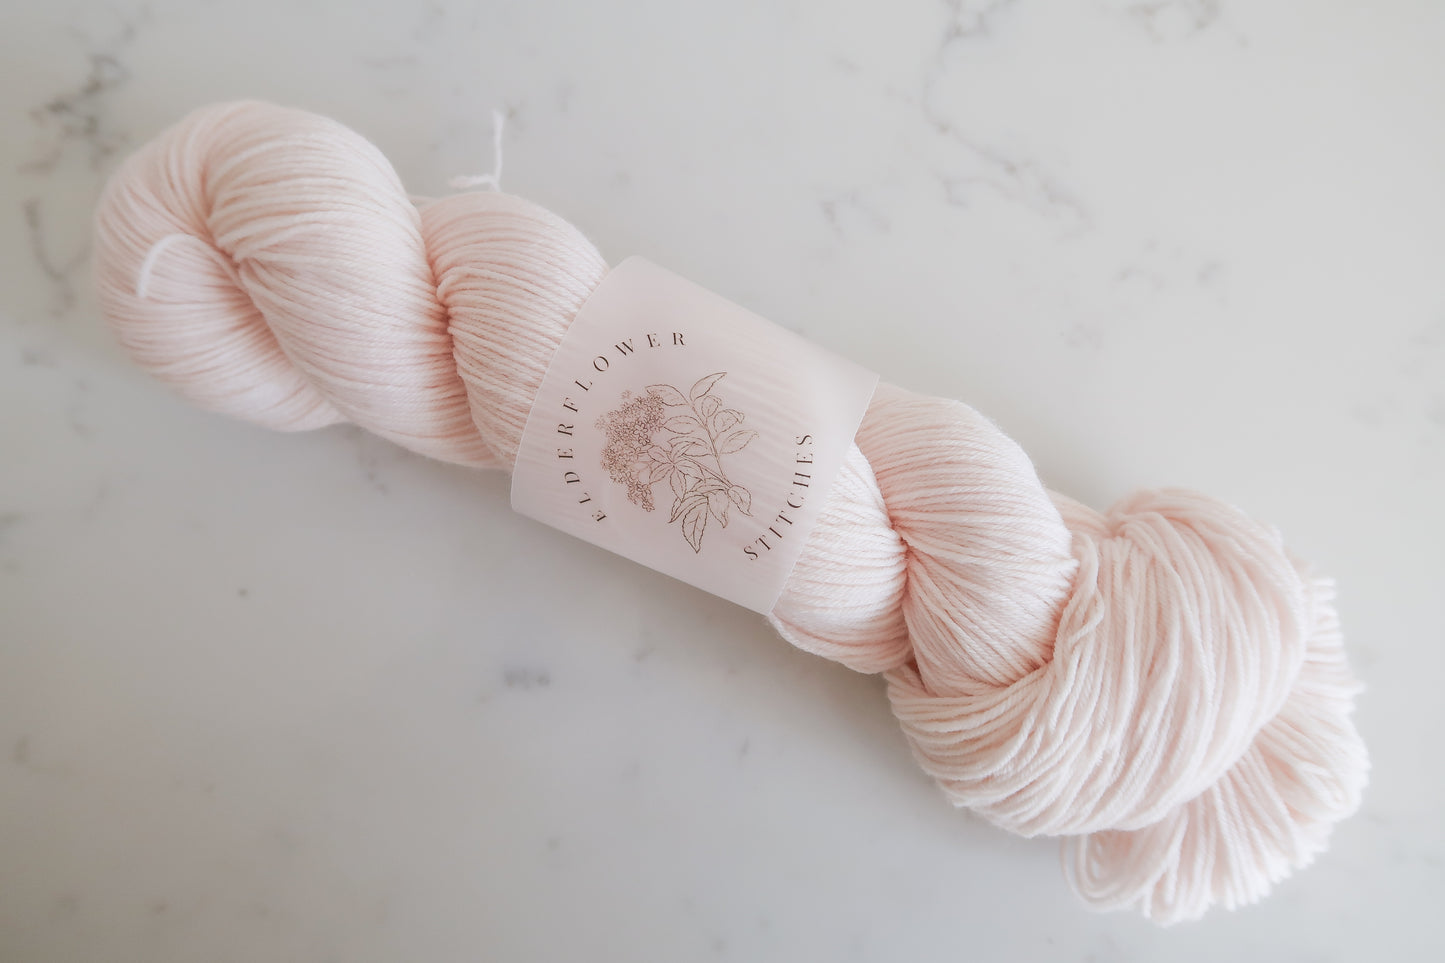 Pirouettes Semi-Solid Handdyed Yarn // Dyed to Order